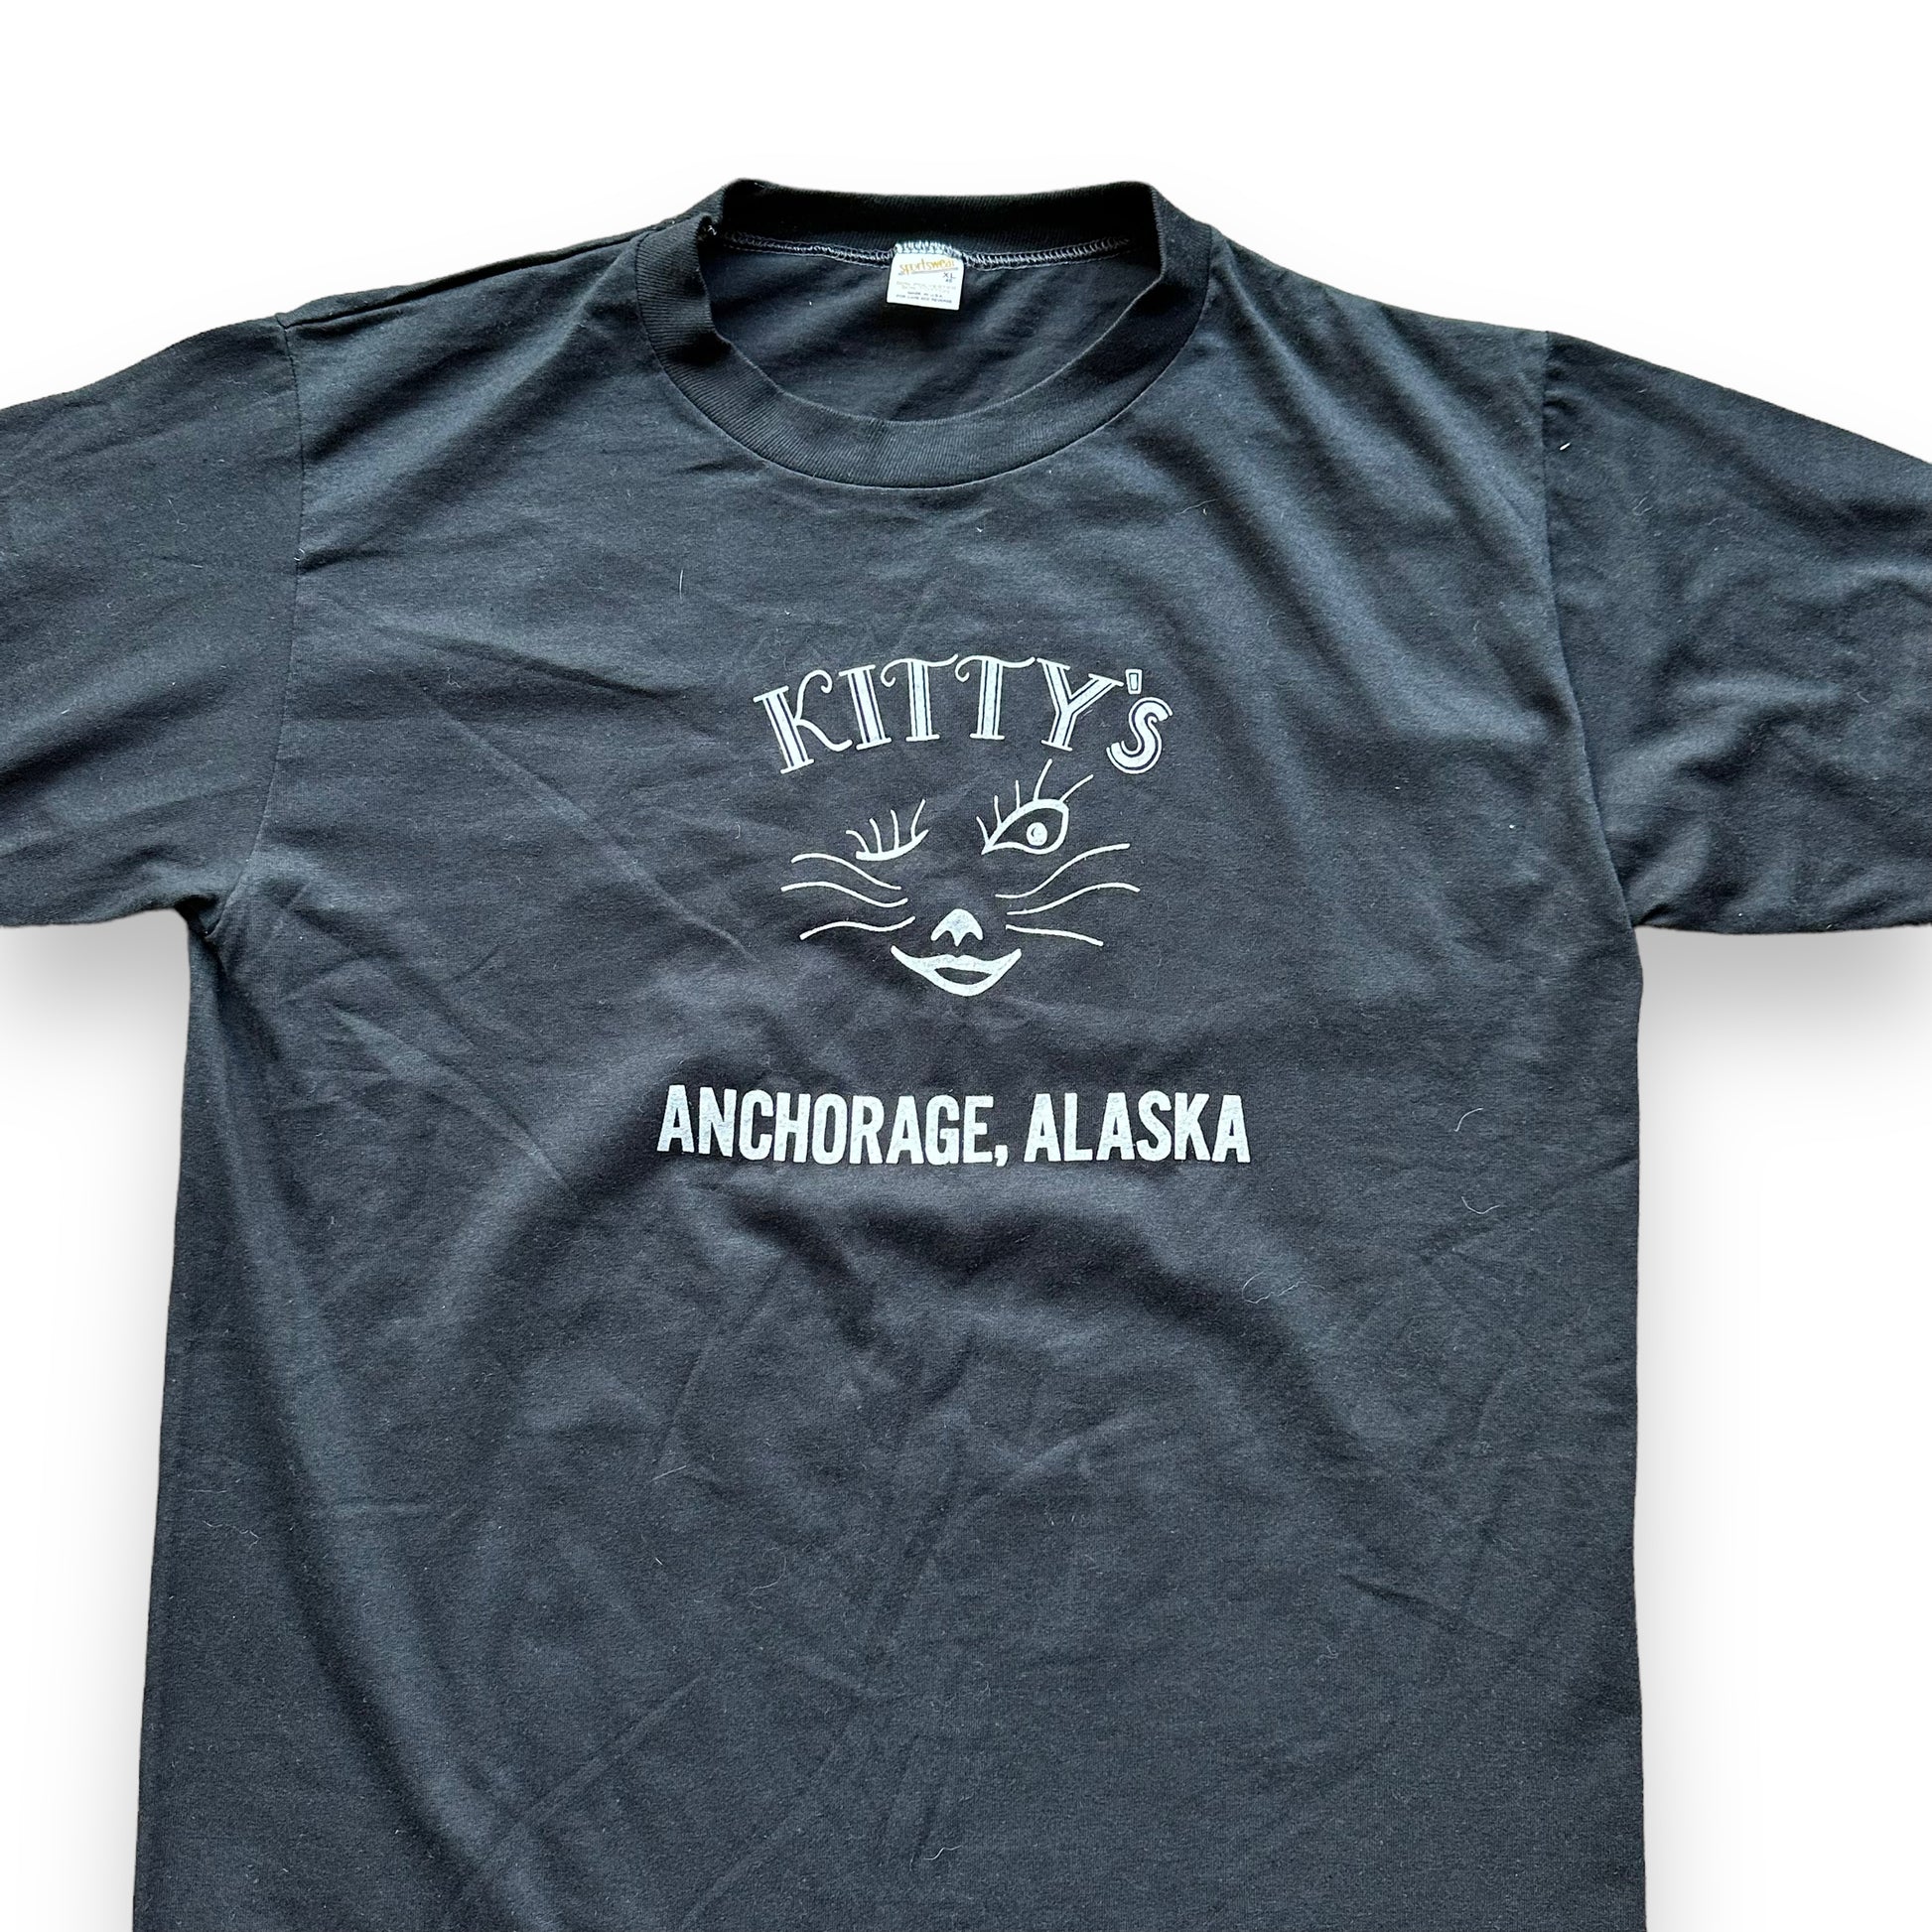 Upper Front View of Vintage Kitty's Anchorage Alaska Tee SZ XL | Vintage T-Shirts Seattle | Barn Owl Vintage Tees Seattle